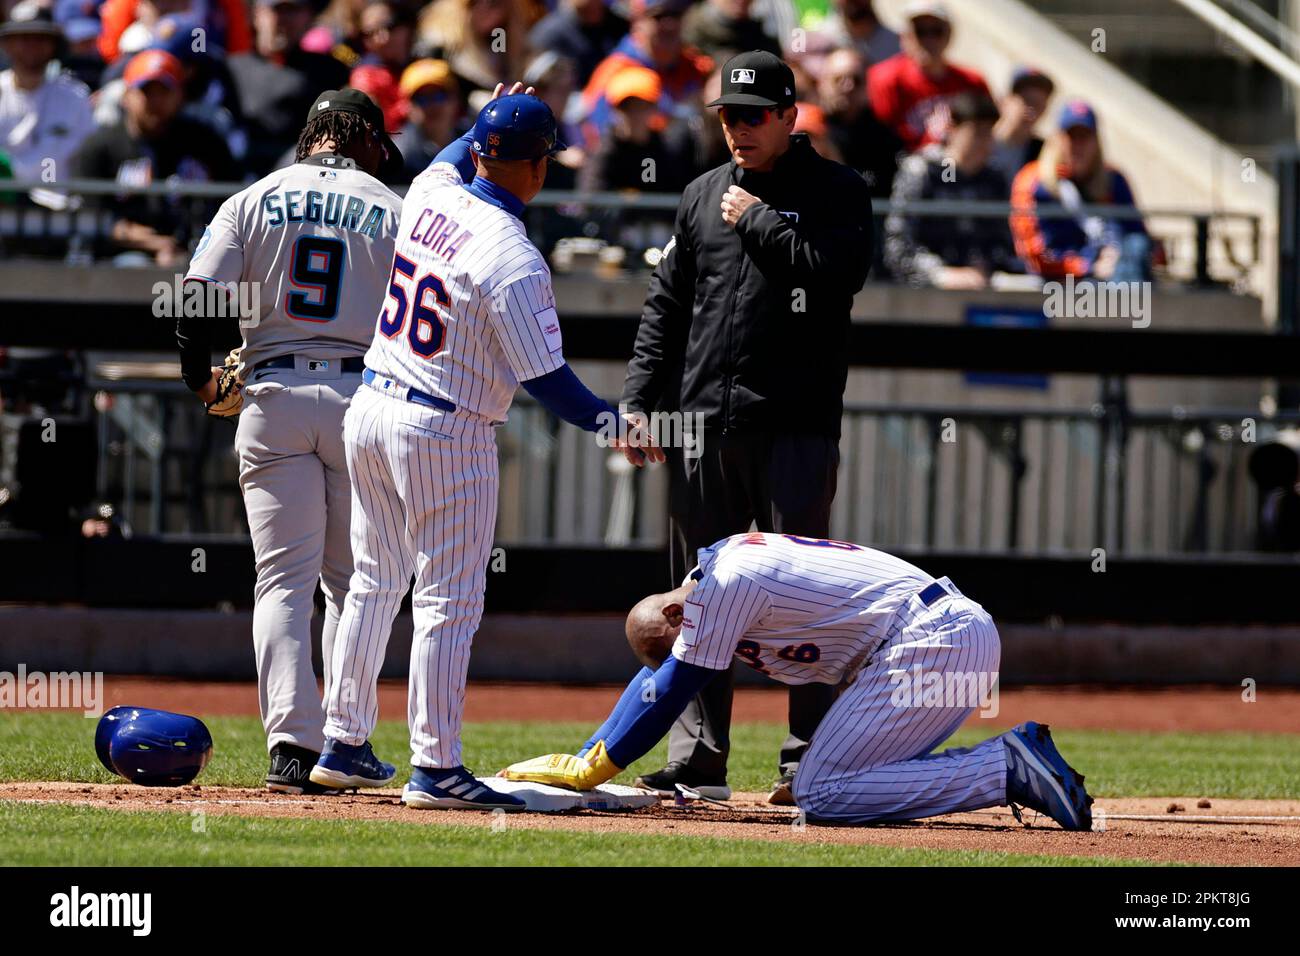 New York Mets infield & third base coach Joey Cora (56) asks for time after  Starling Marte collided with Miami Marlins third baseman Jean Segura (9)  during the first inning of a